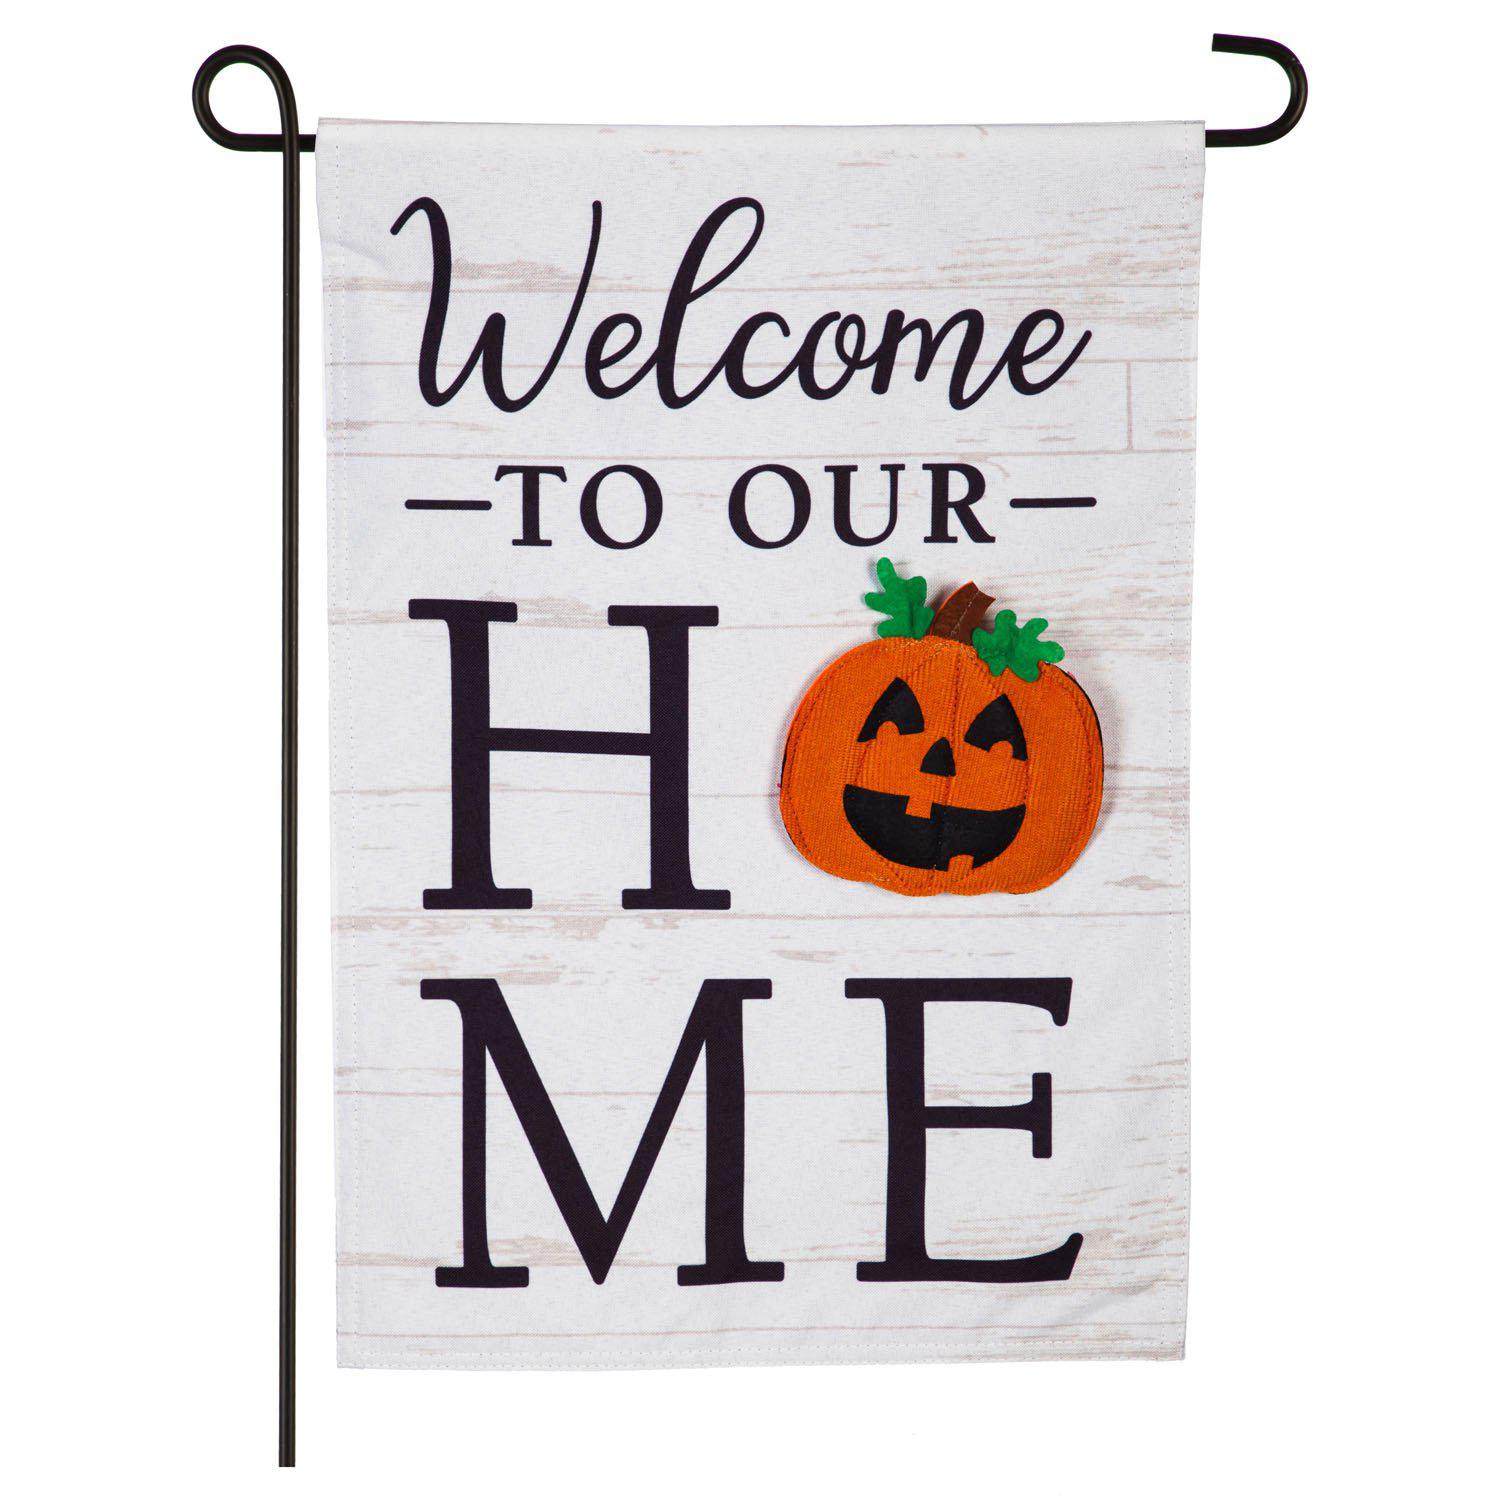 Welcome to Our Home Interchangeable Garden Flag with jack-o-lantern